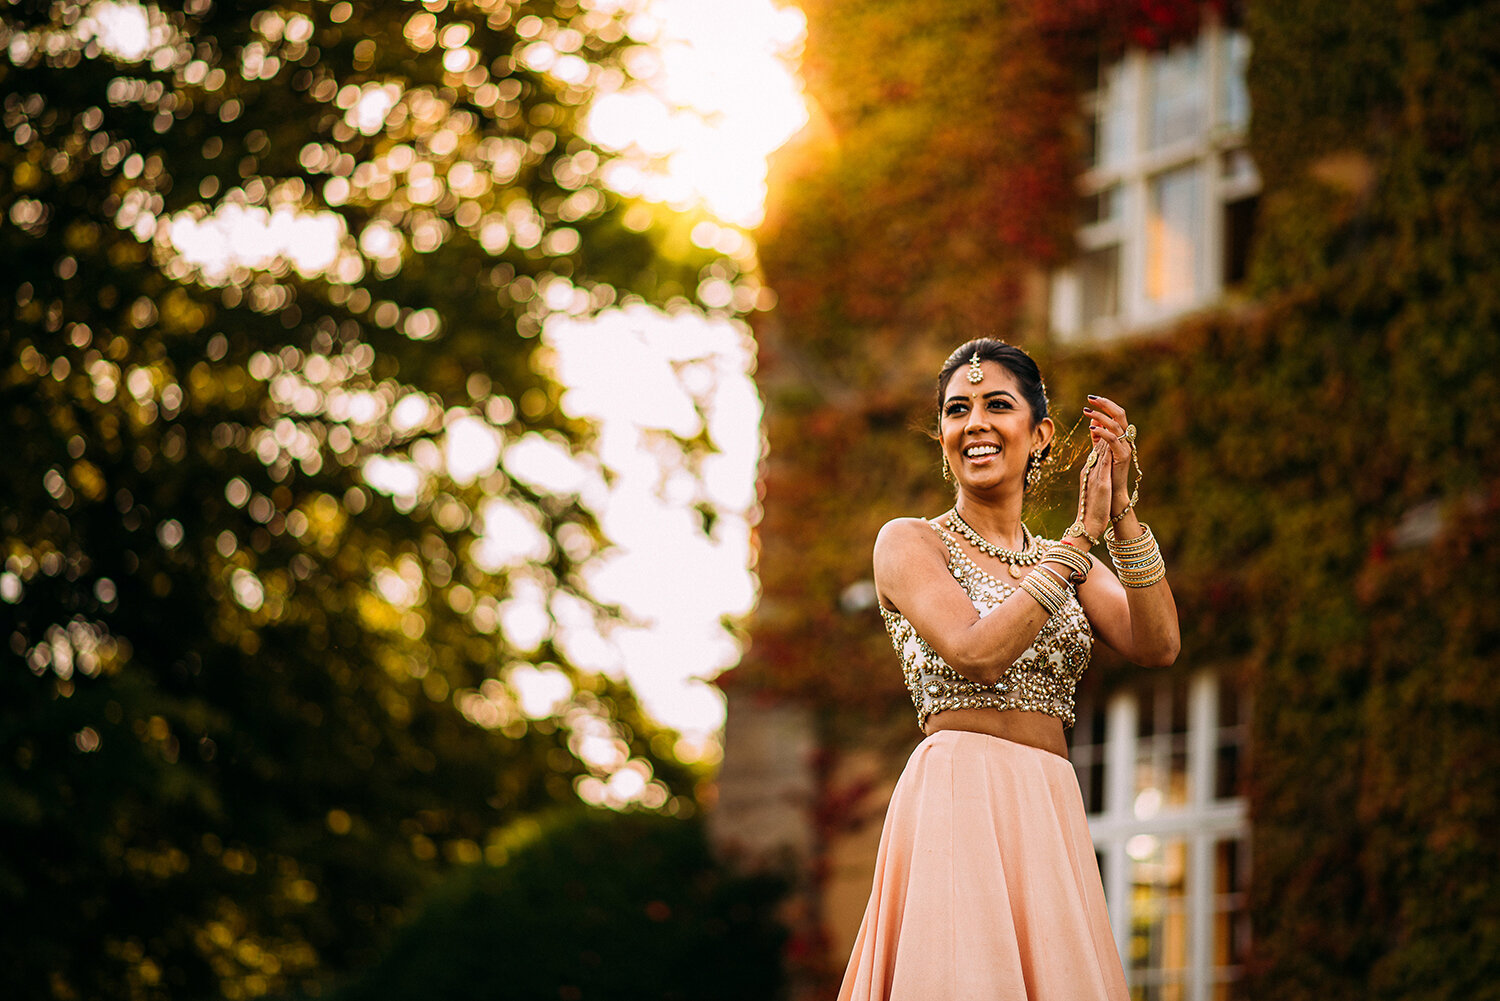  nice natural shot of the bride clapping while watching the groom play cricket as the low sun creeps around the building 